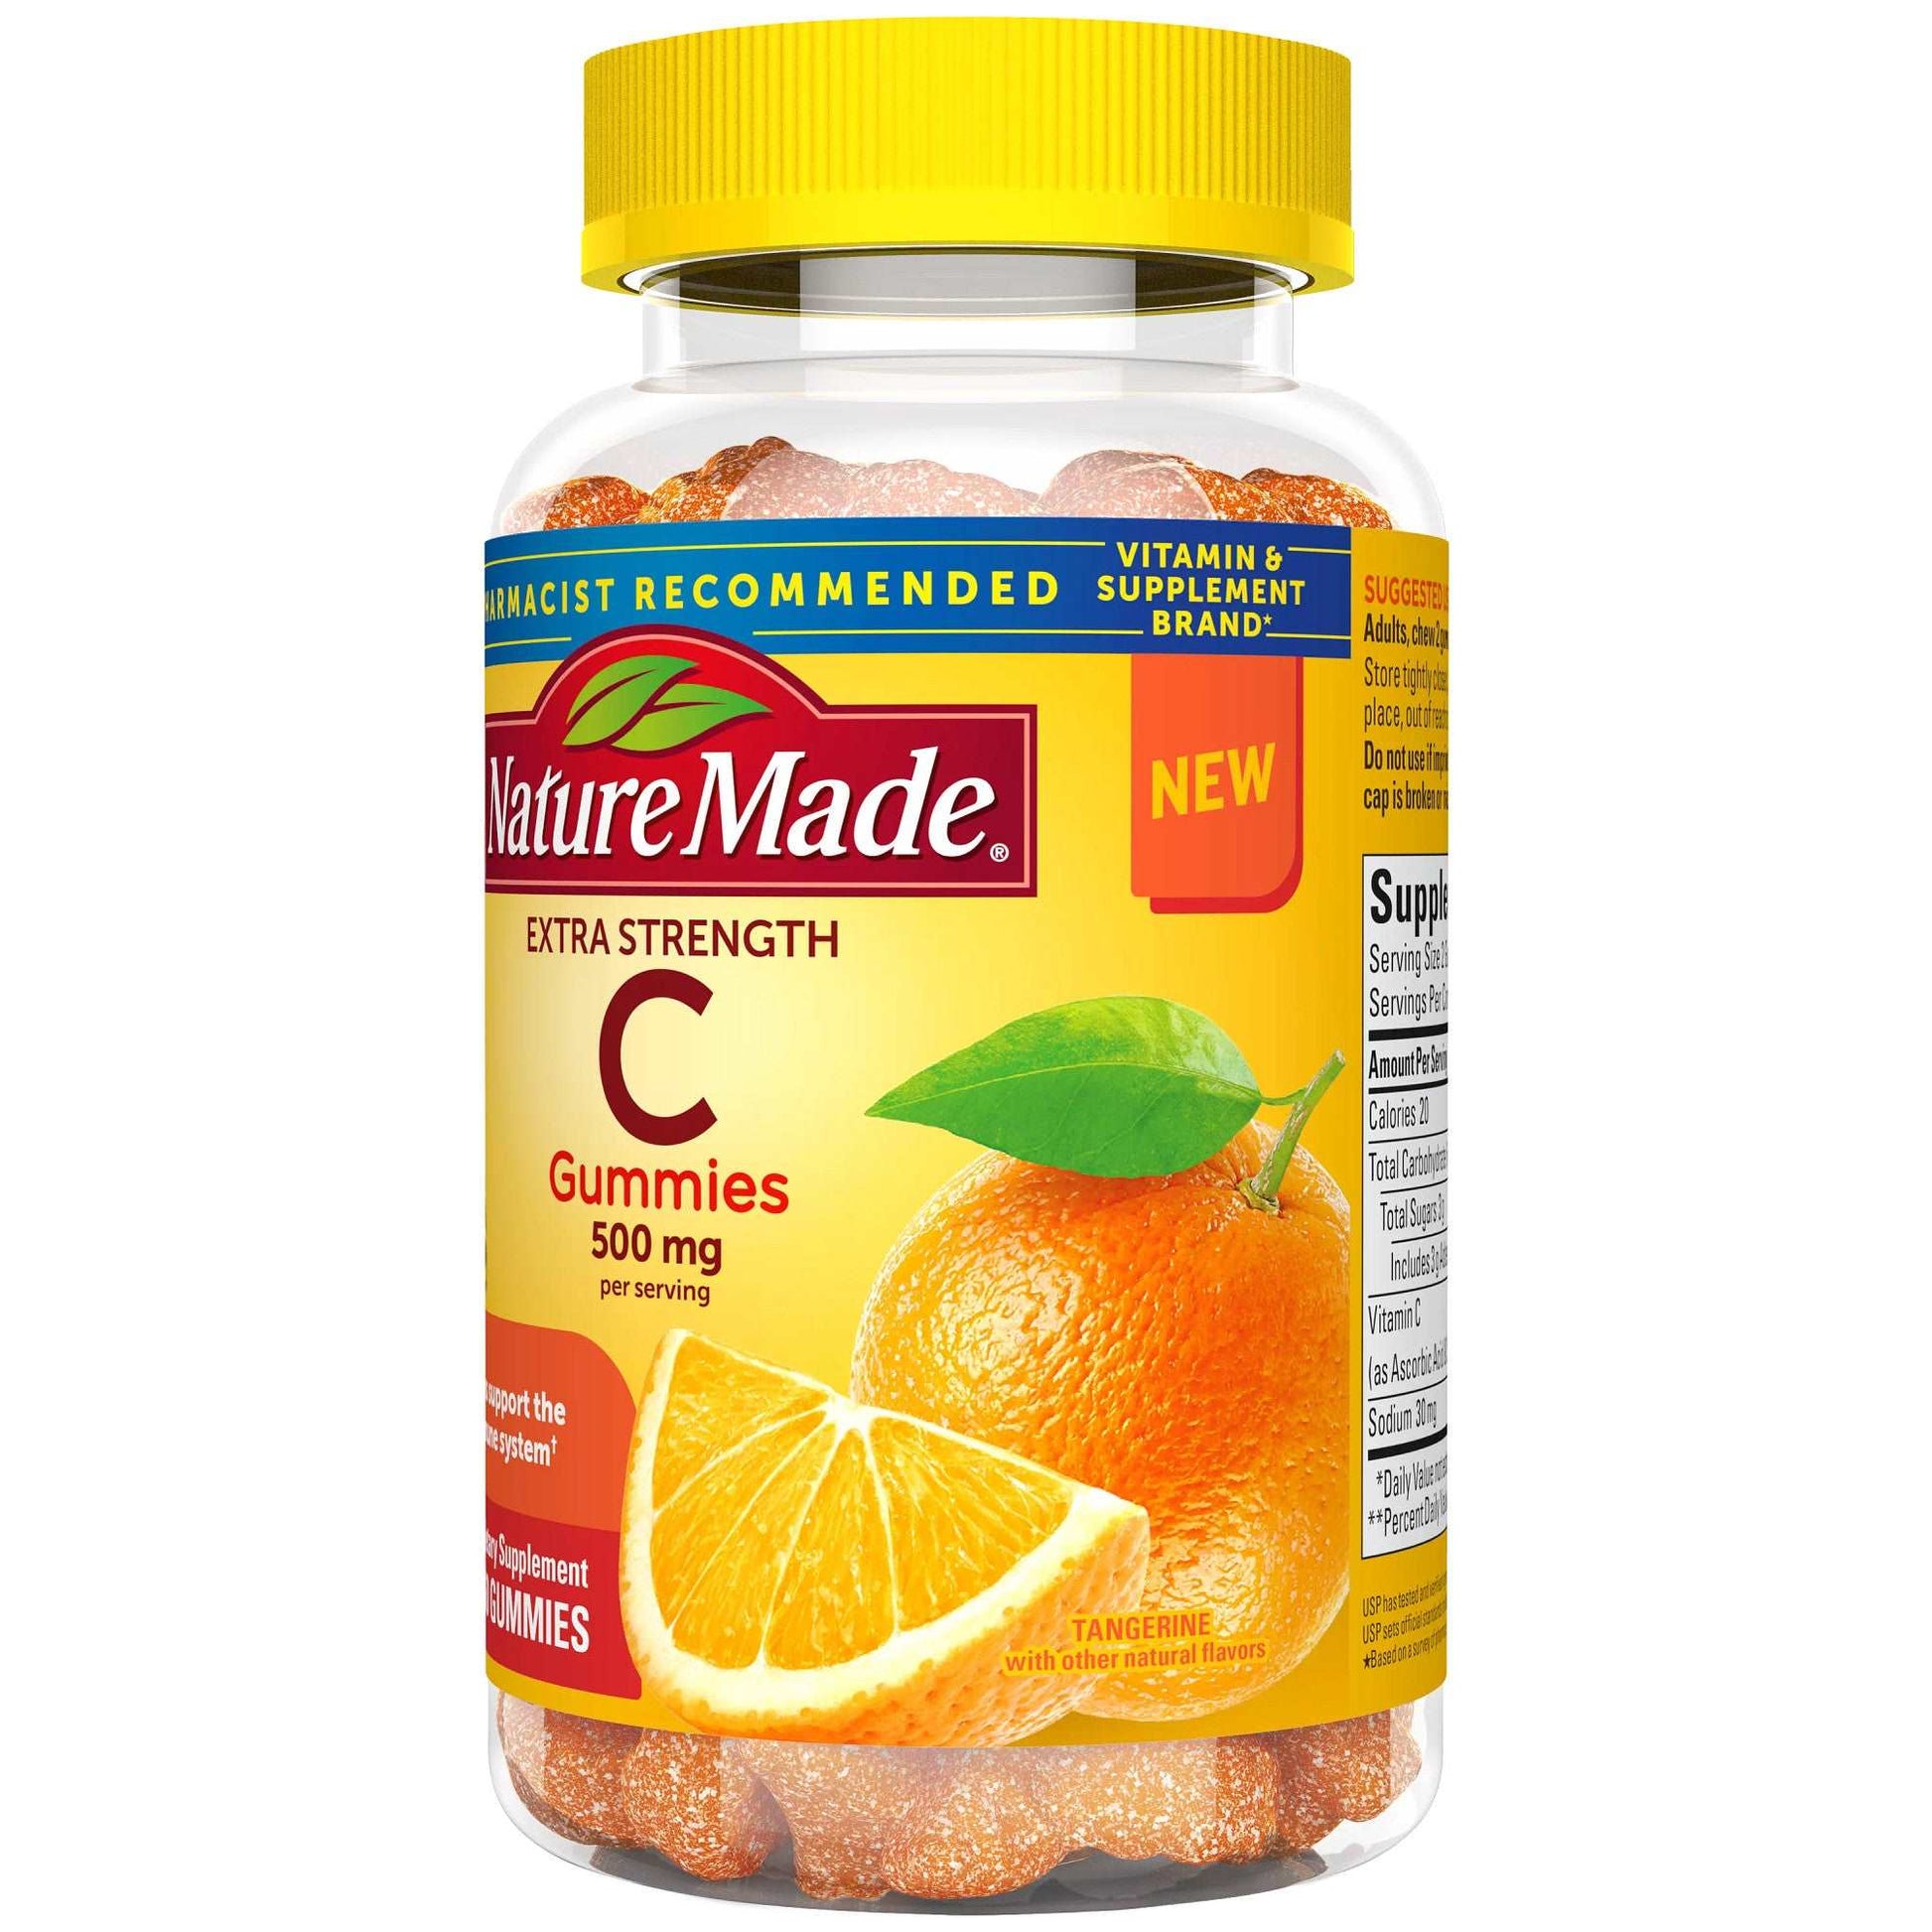 Nature Made Extra Strength Dosage Vitamin C 500 mg per serving Gummies, 60 Count